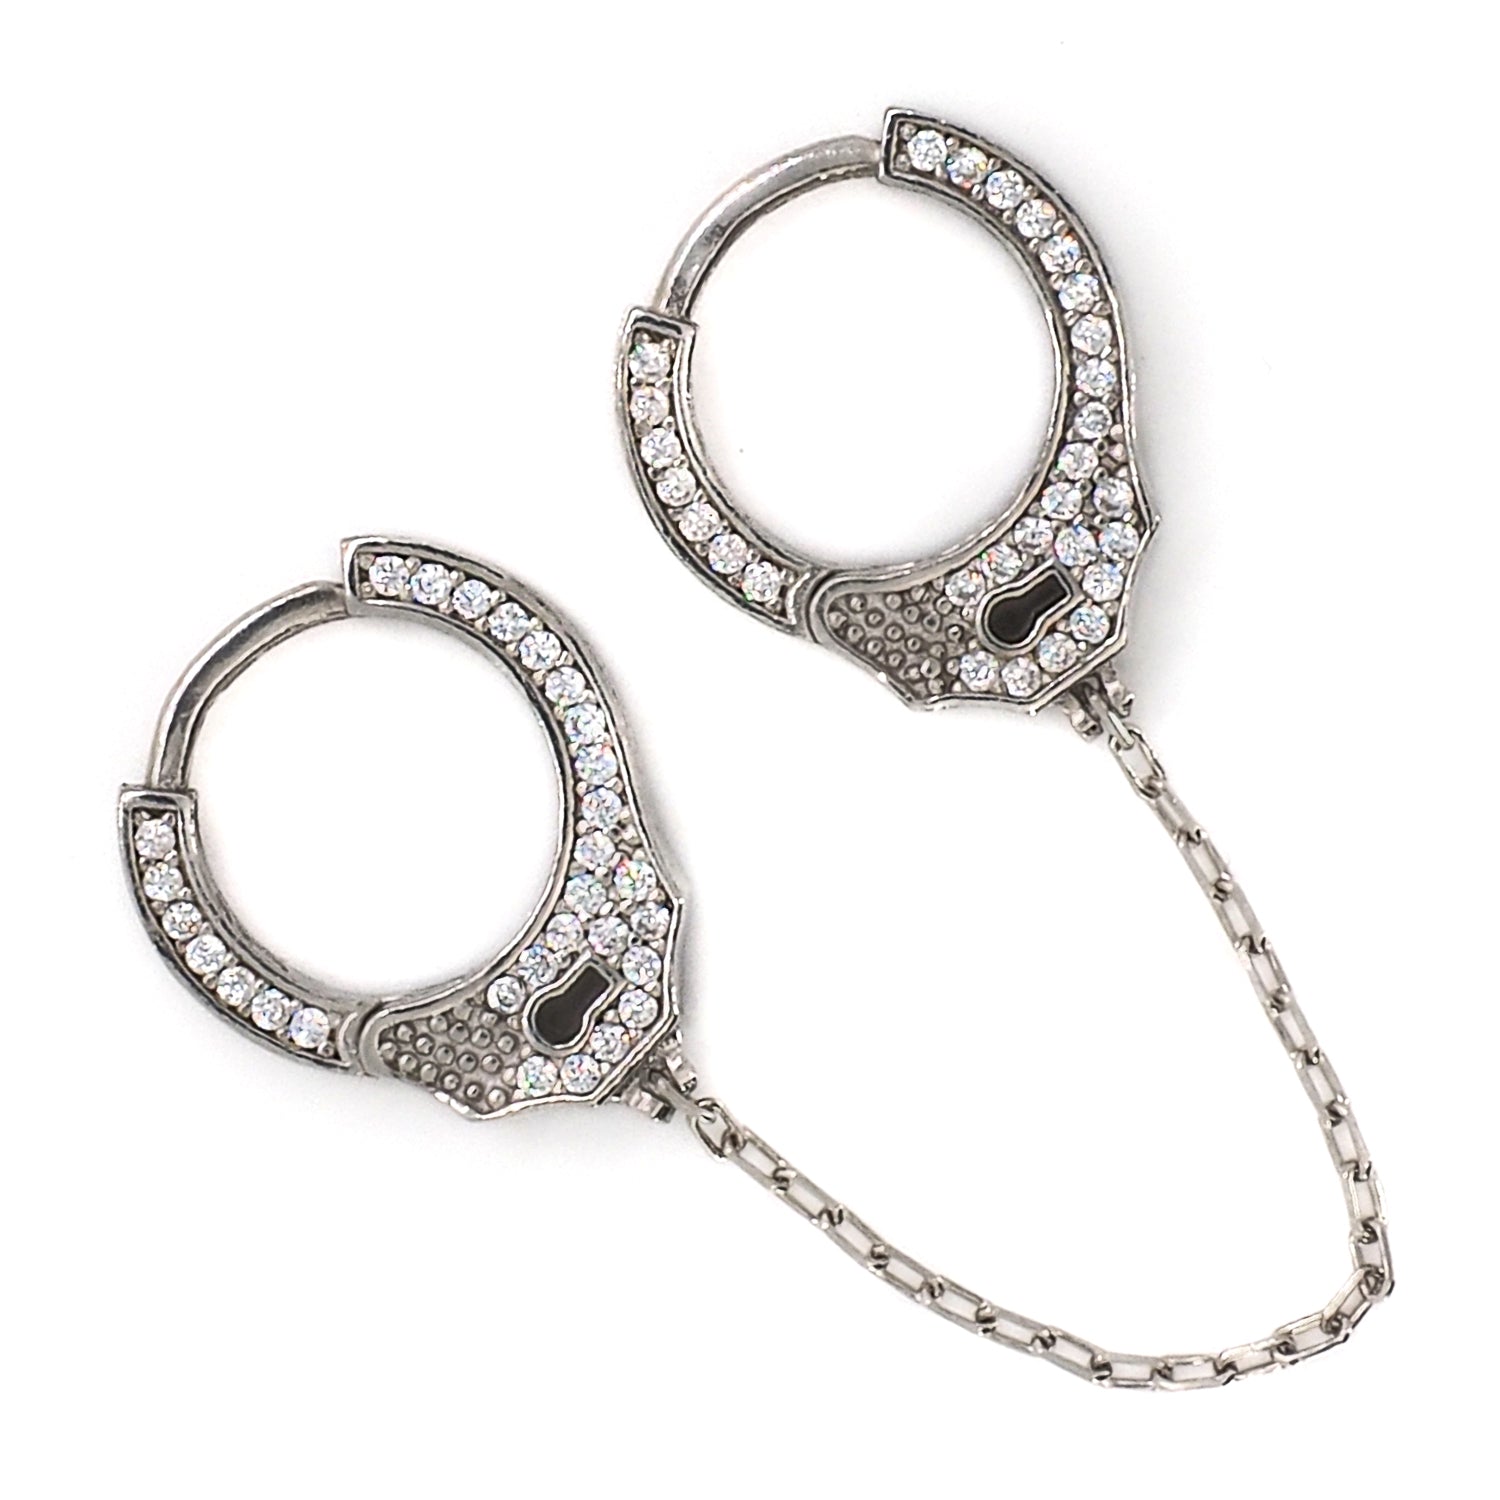 Shimmering Diamonds and Radiant Silver: Attention-Grabbing Earrings